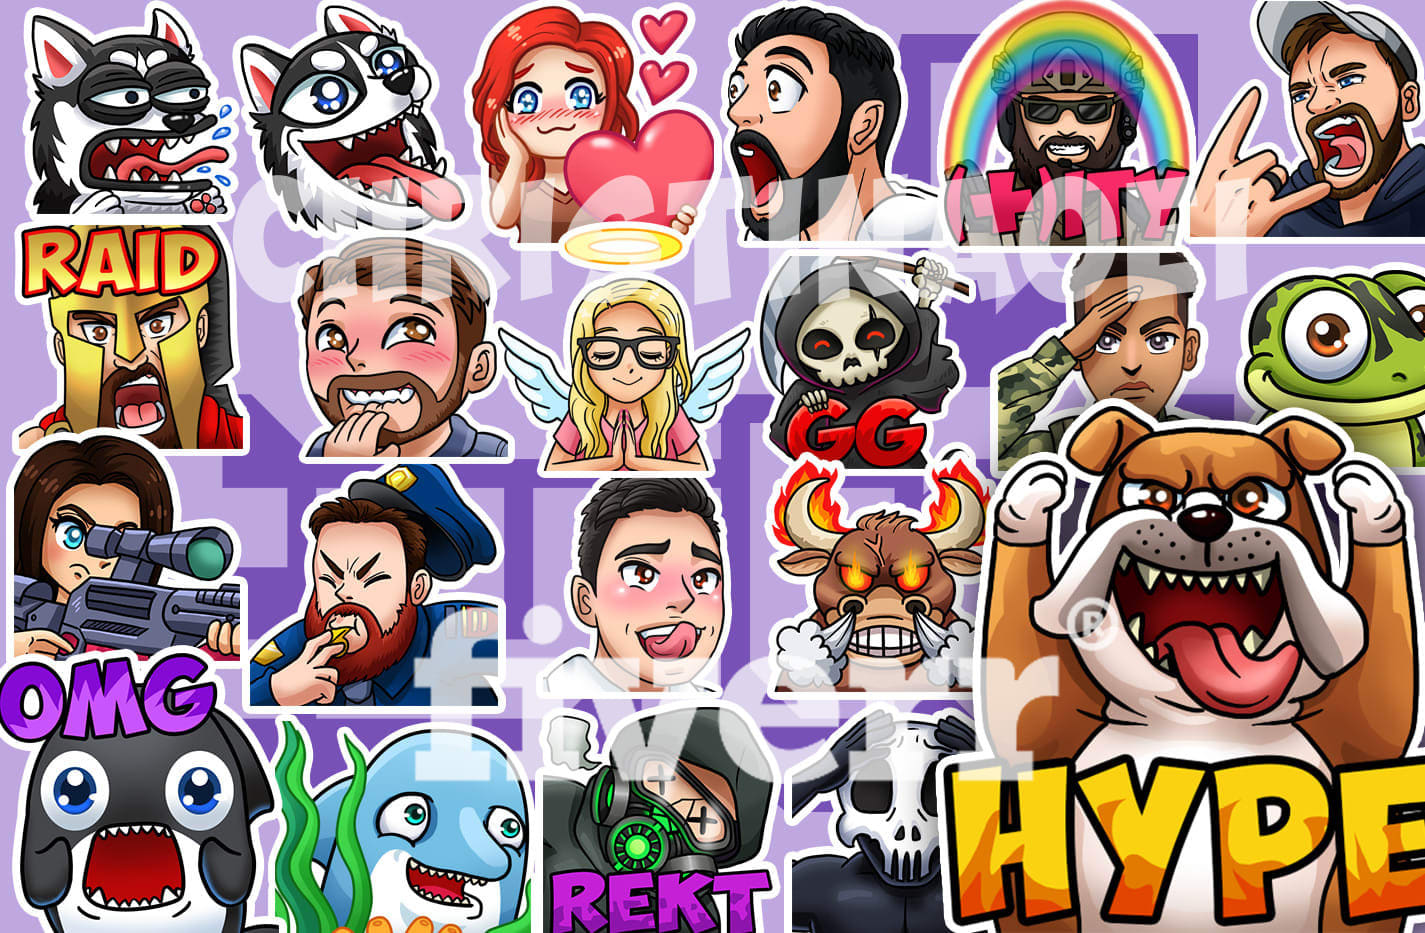 Draw Great Twitch Emotes Or Sub Badges For You By Christinaoei